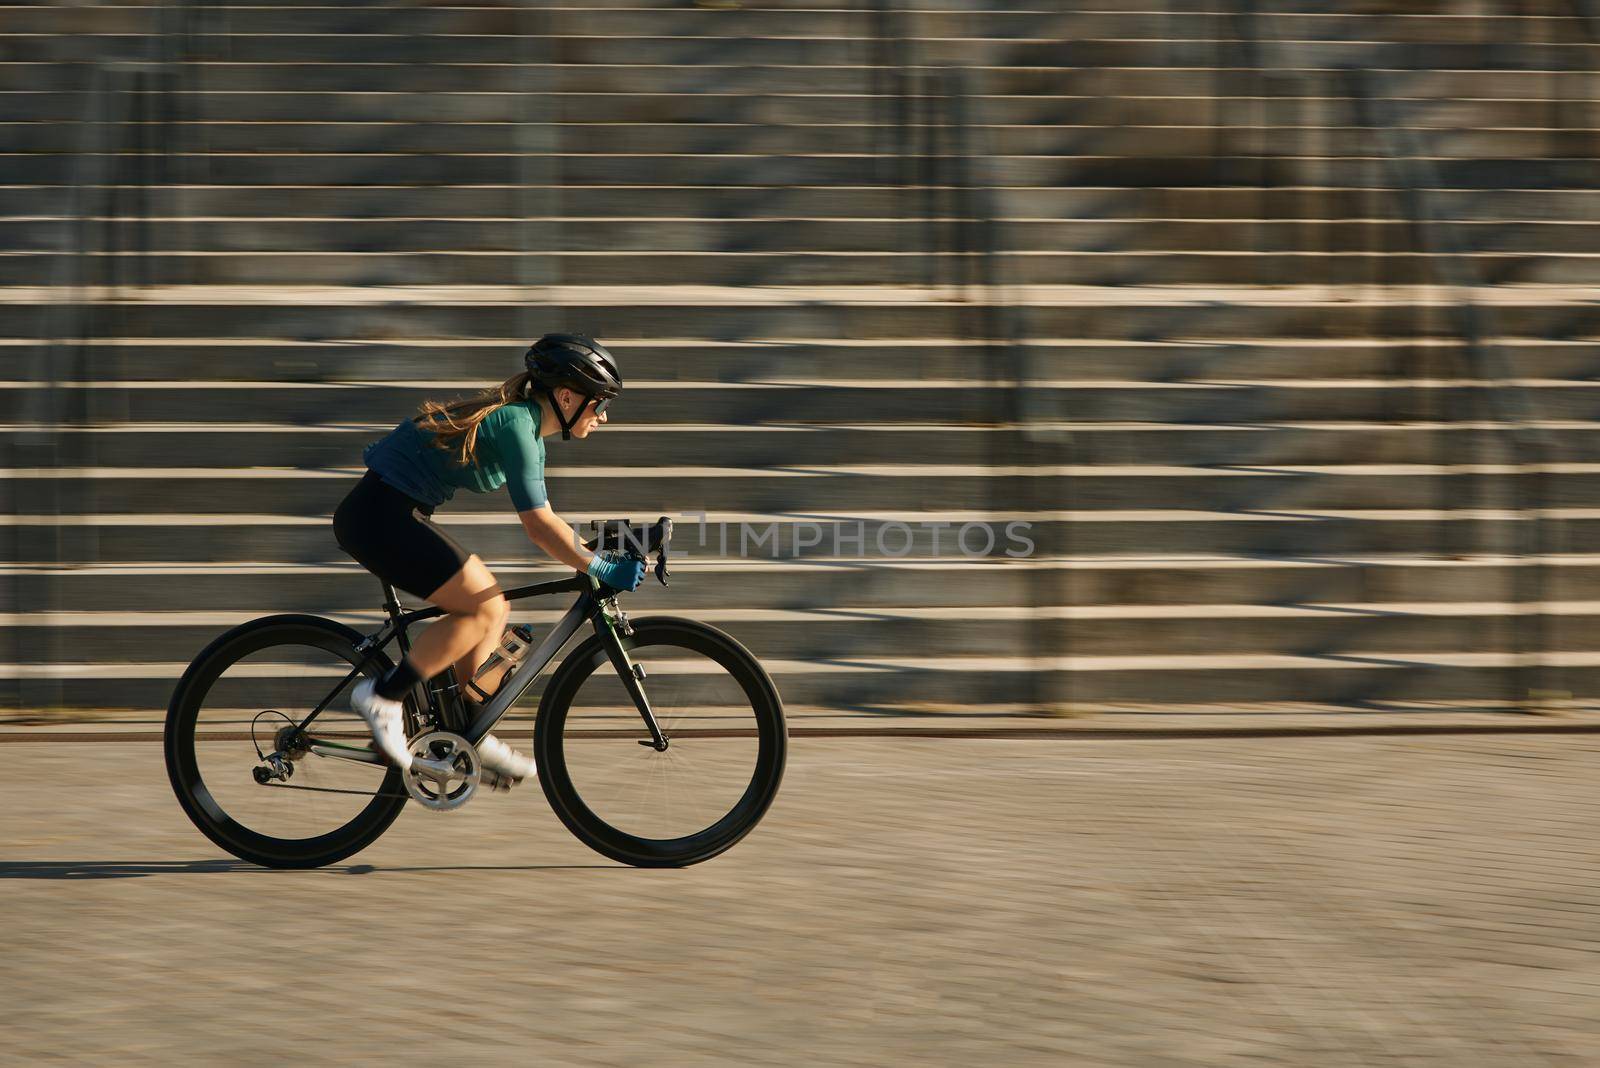 Side view of professional female cyclist in protective gear riding bicycle in city, rushing and passing buildings while training outdoors on a daytime. Urban lifestyle, sports concept